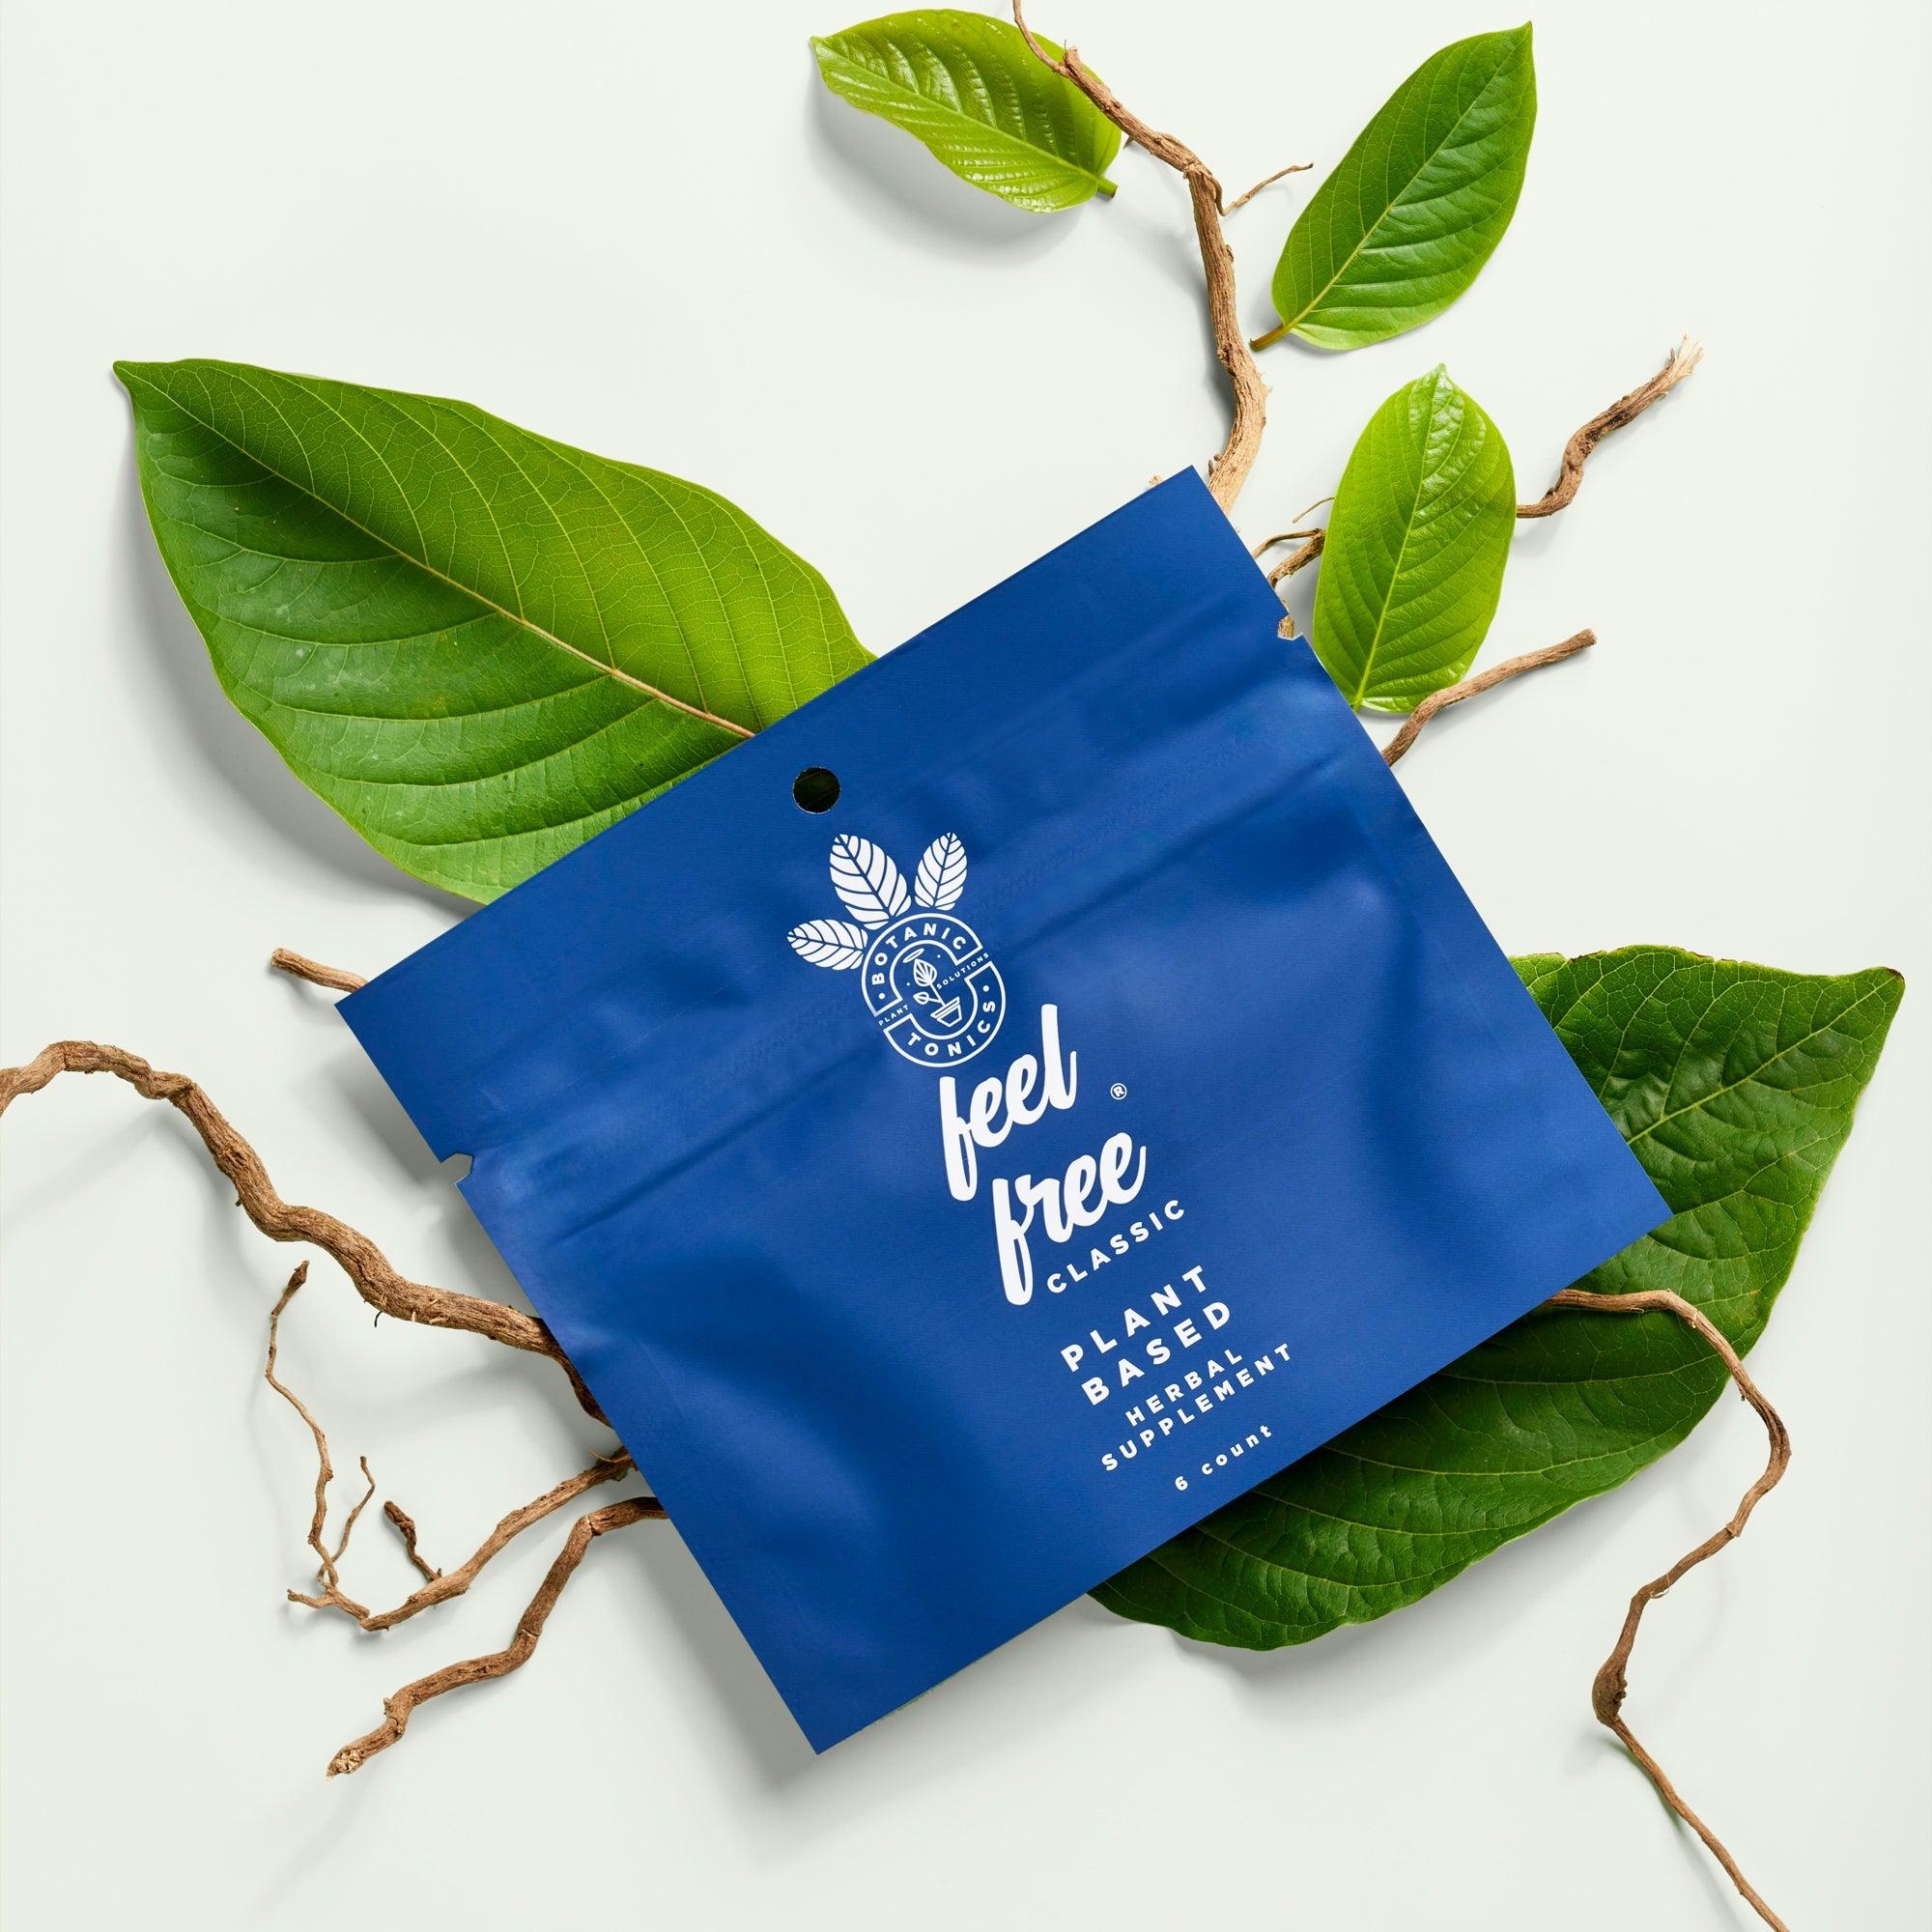 feel free classic wellness capsules  - pouch on leaves